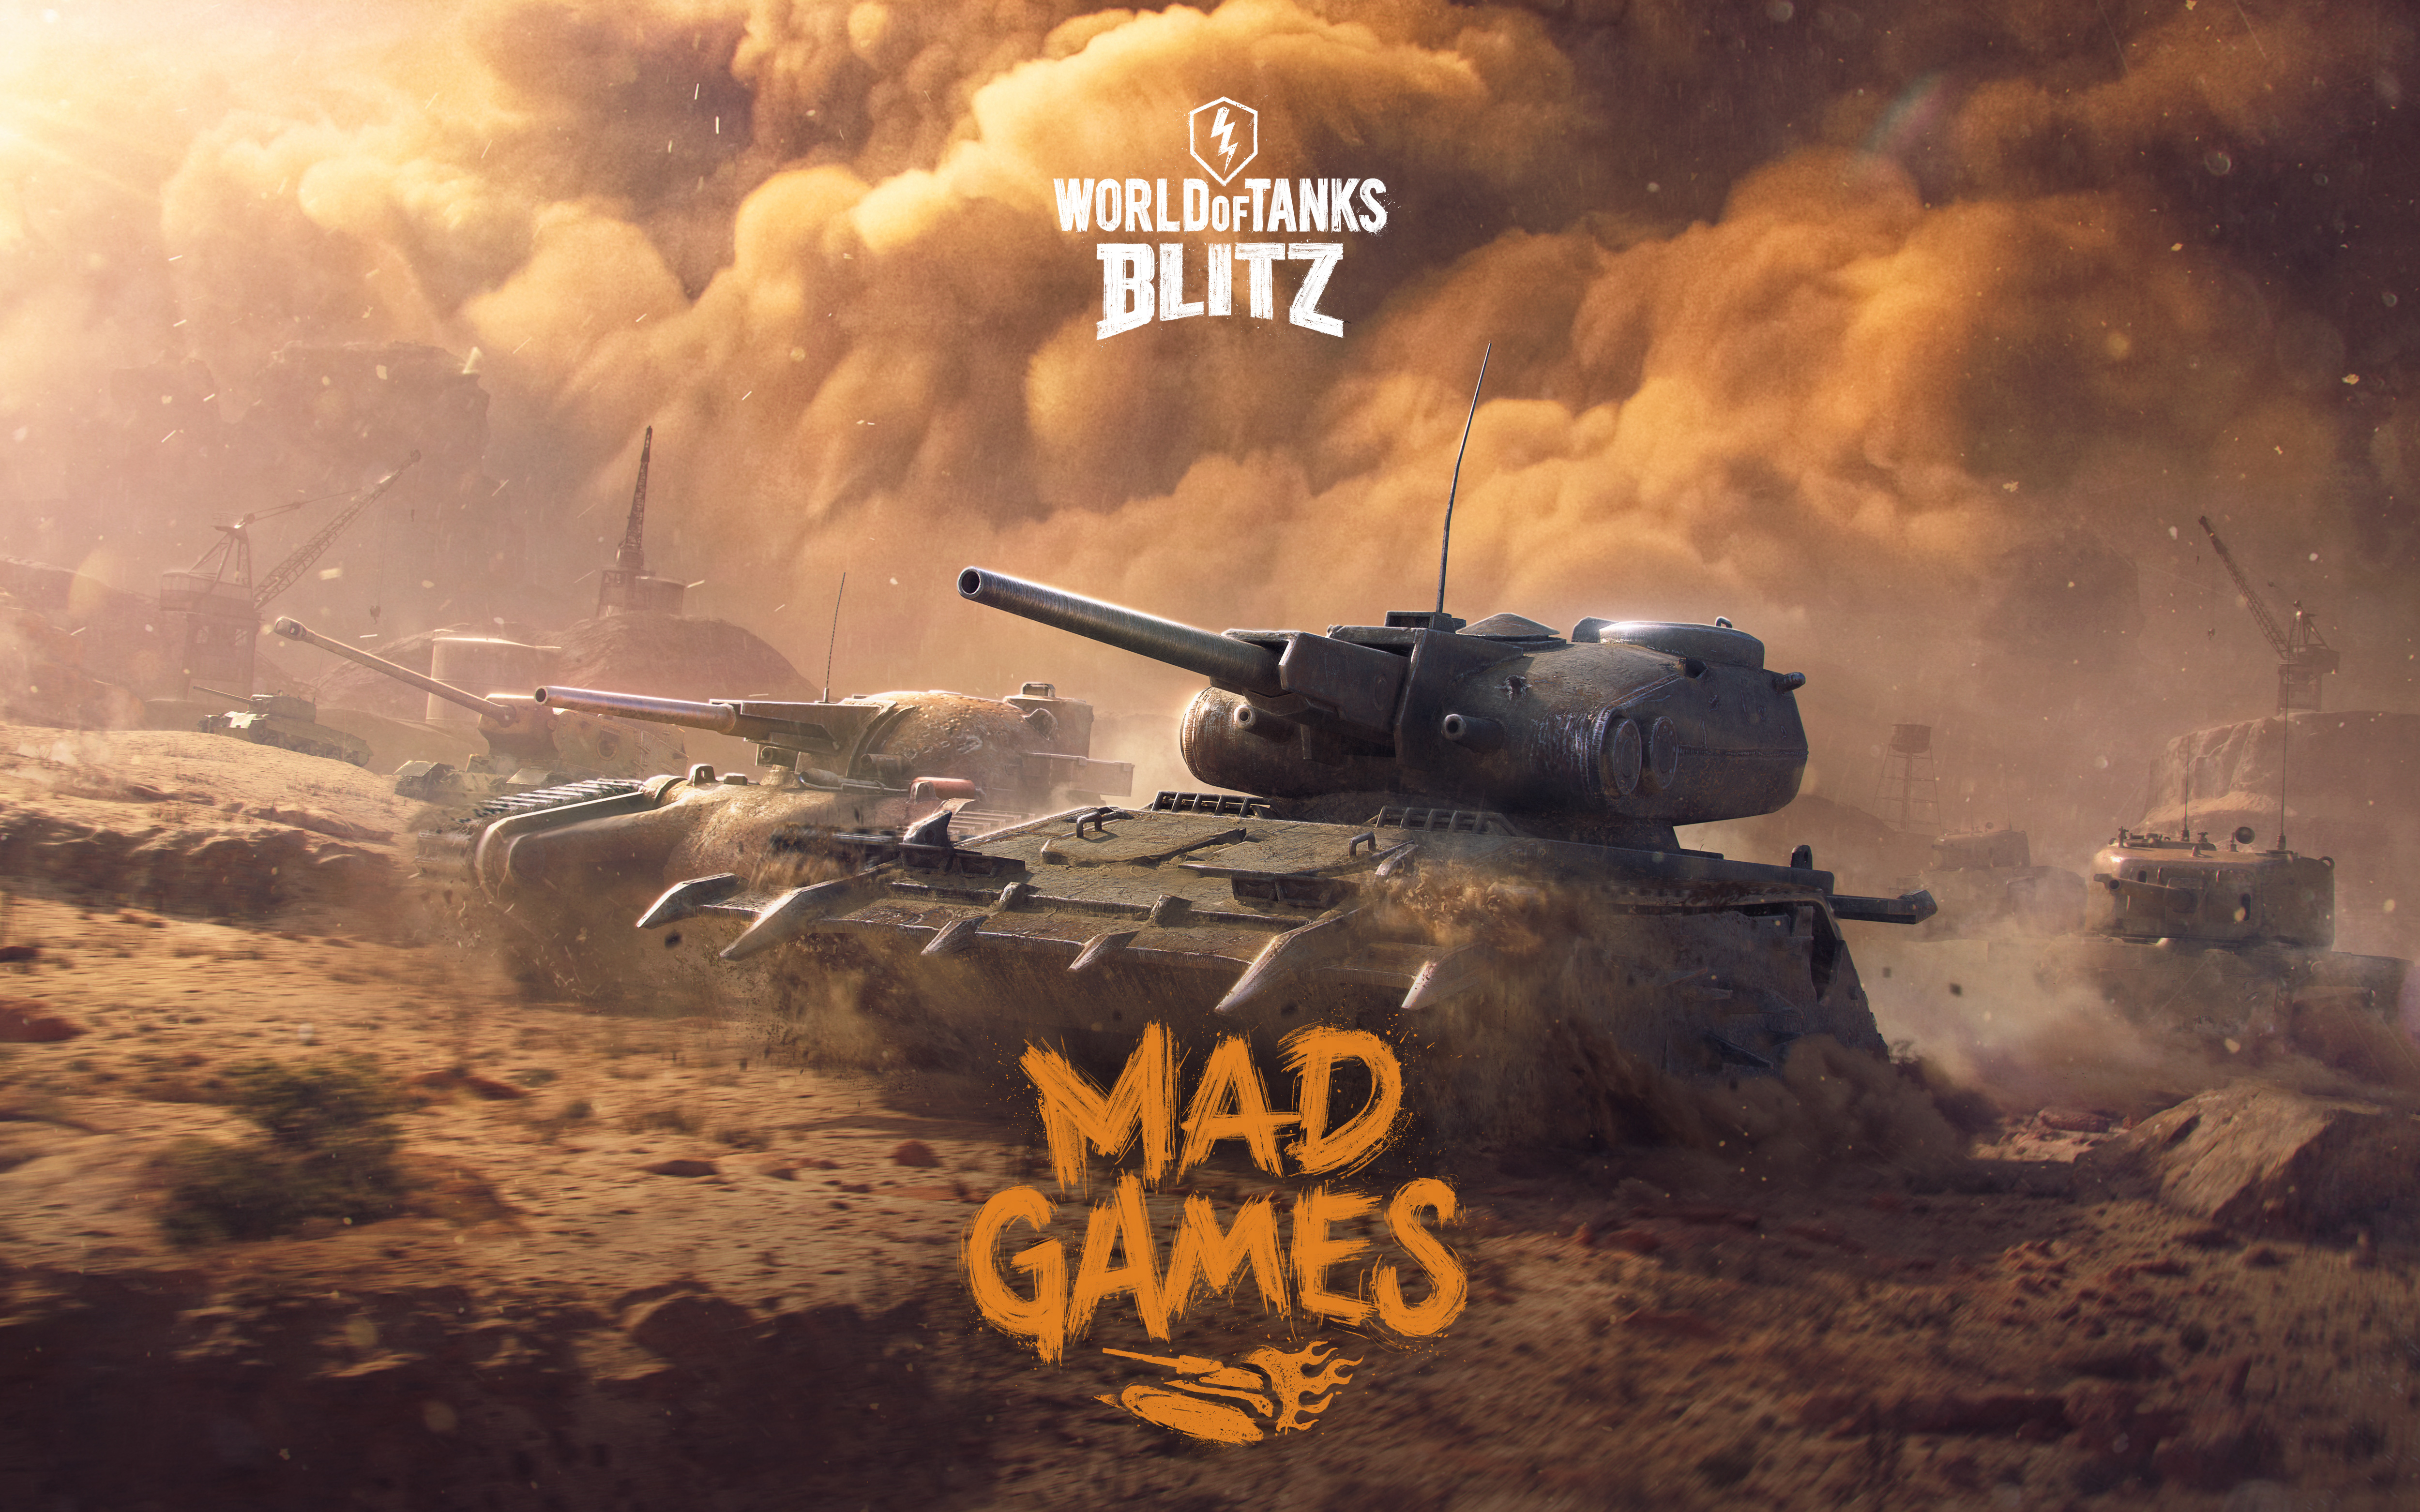 World Of Tanks Blitz Mad Games 2018 5k, HD Games, 4k Wallpapers, Images ...